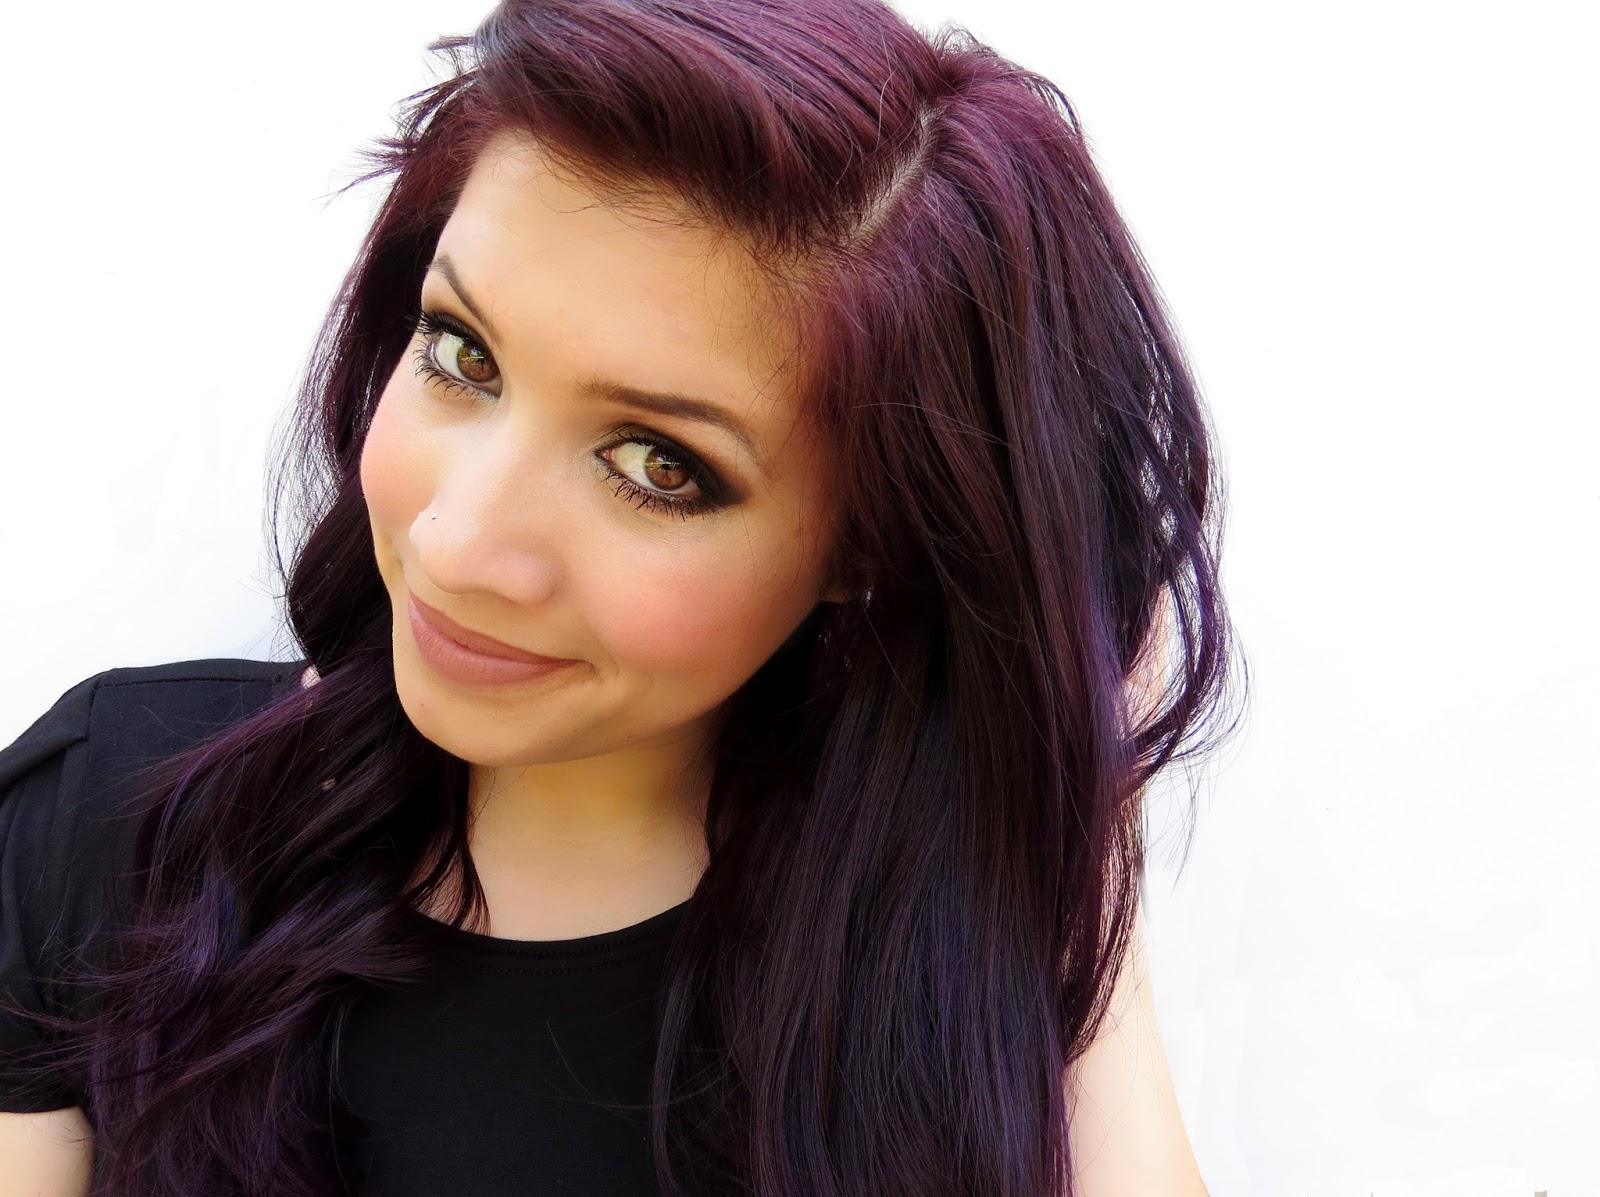 6. "Step-by-Step Guide to Dyeing Your Hair Purple with Blue Underneath" - wide 6